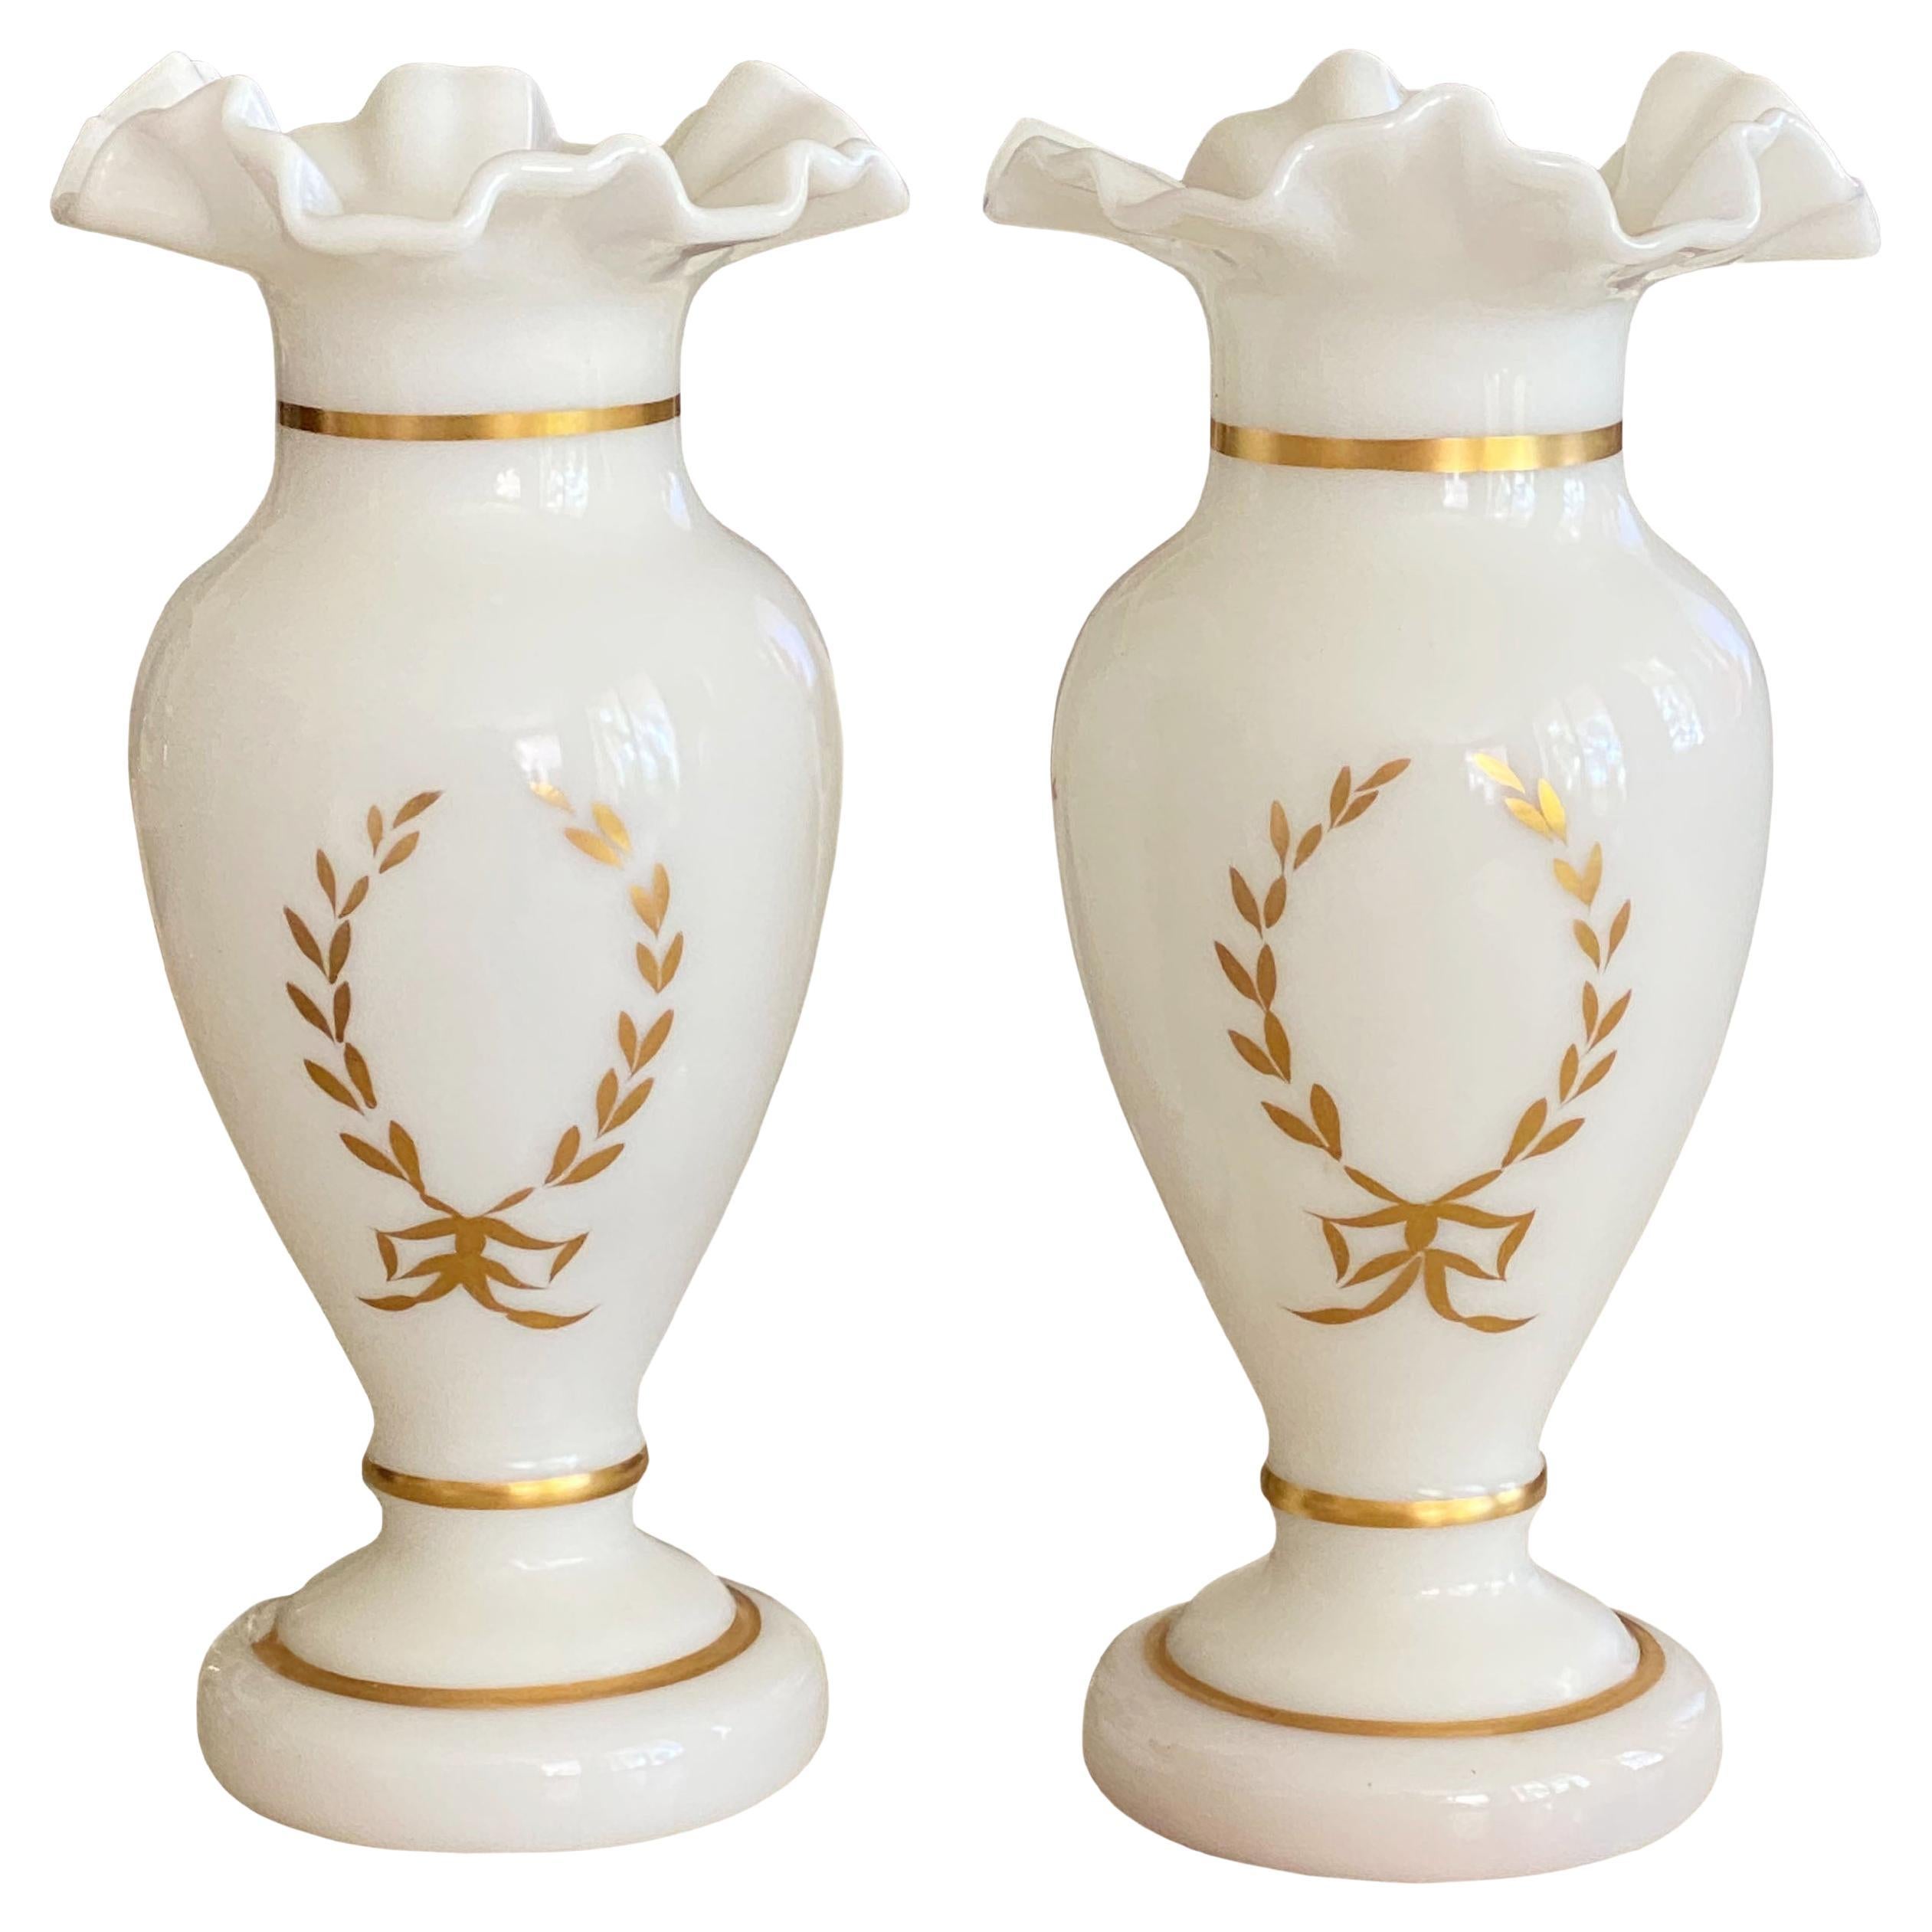 Antique White and Gilt Opaline Vases, a Pair